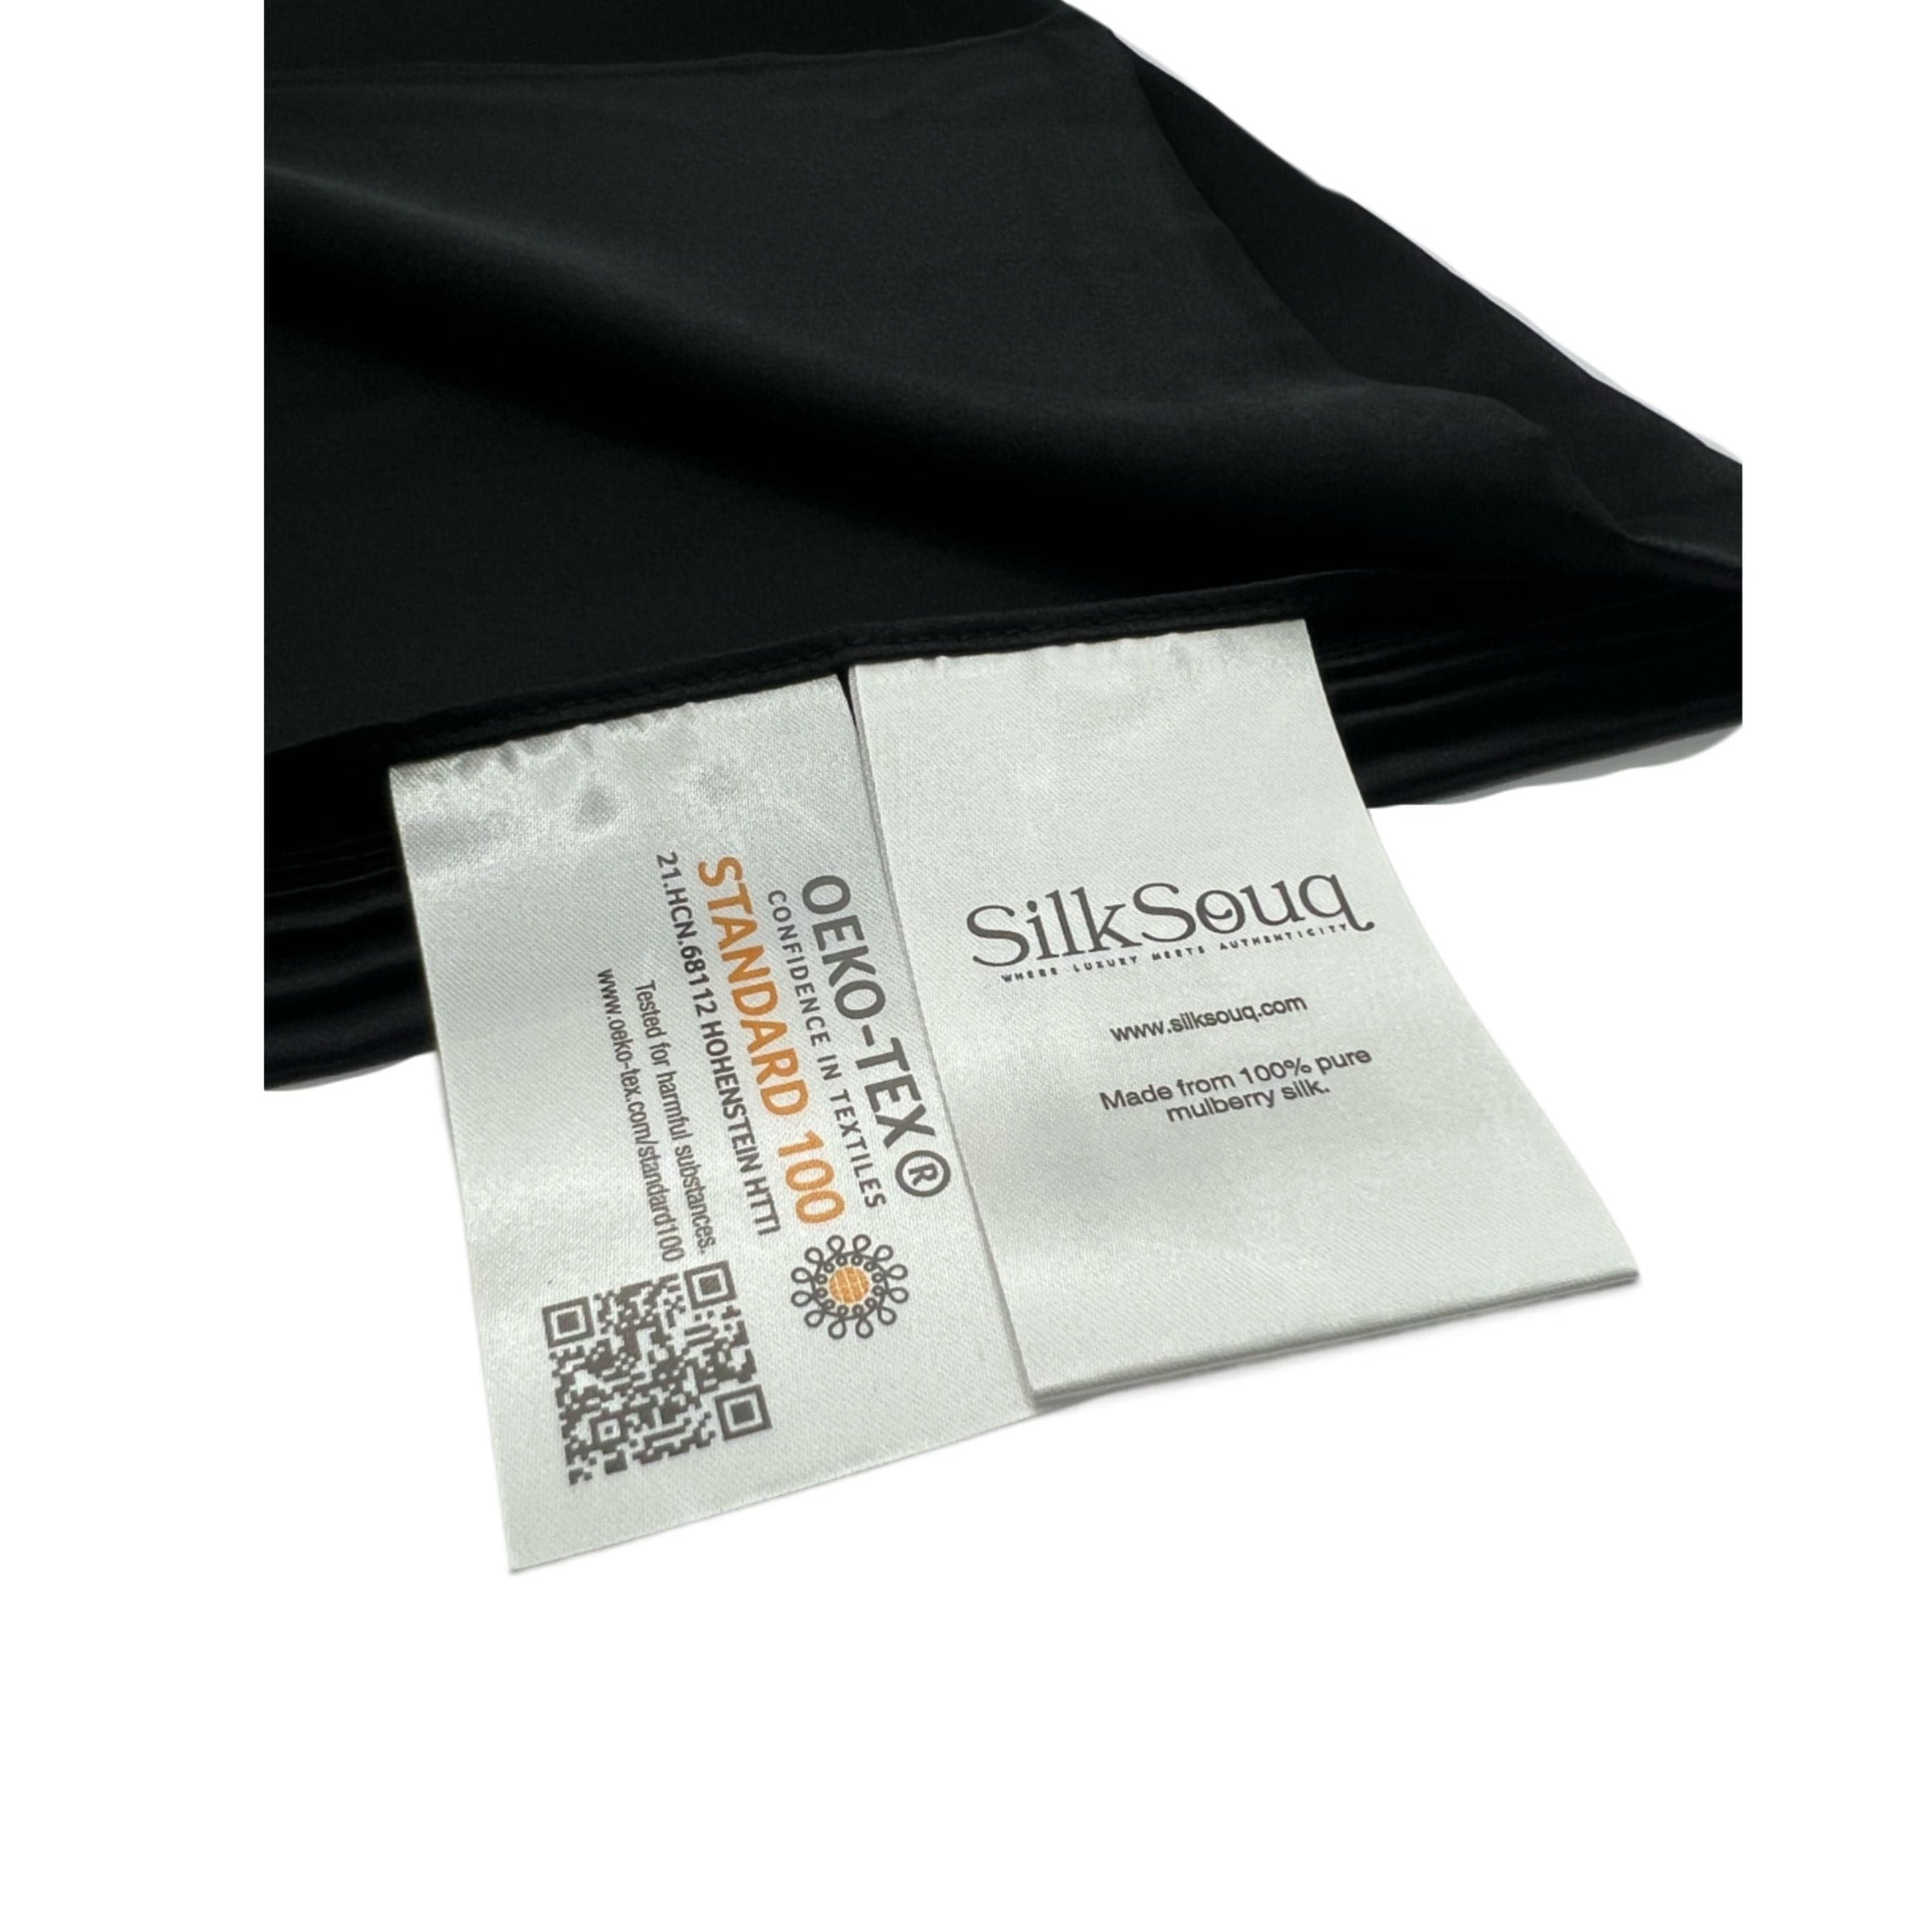 Pure Mulberry Silk Scarf, Hijab From Silksouq & Silksouk, Also Known As Silk Souq In Uae